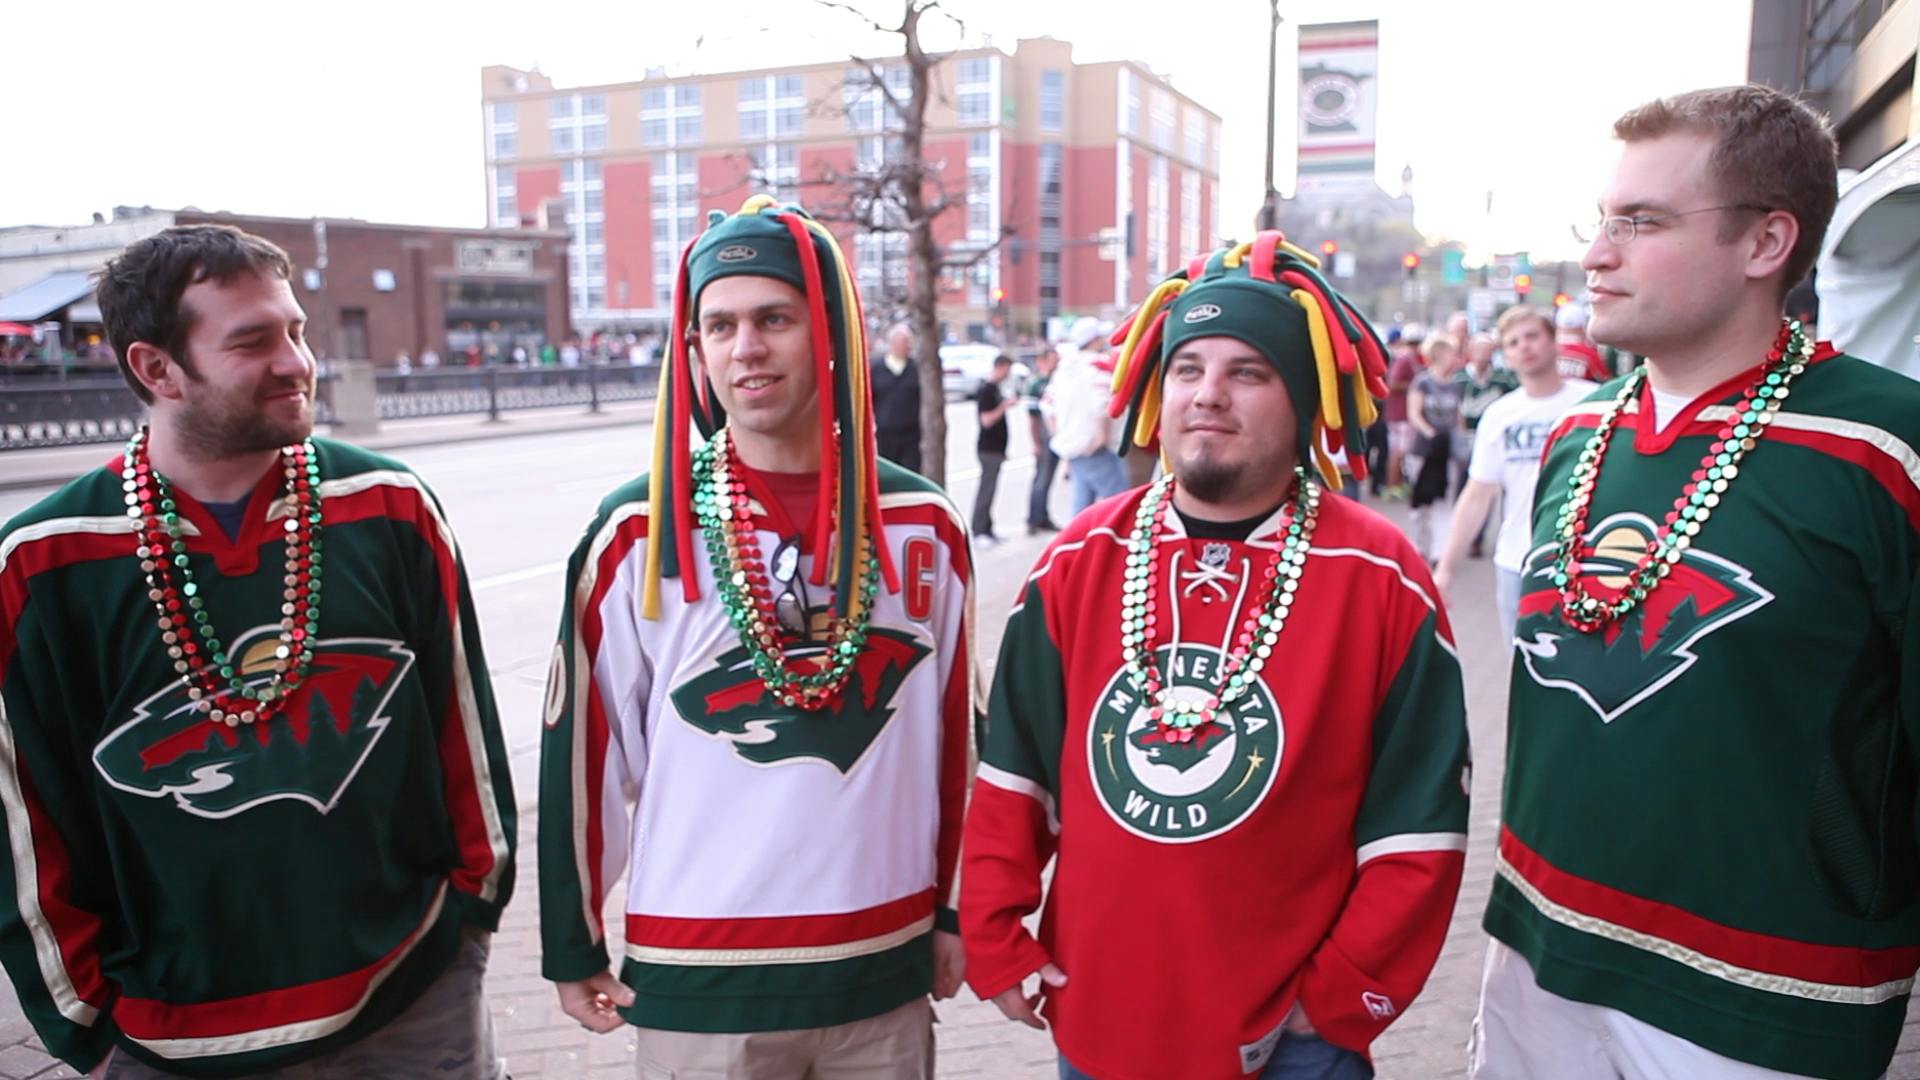 Fans got revved up for the Wild-Chicago Game 4 playoff game Tuesday and talked about what they wanedt to see during the game at the Xcel Energy Center in St. Paul.